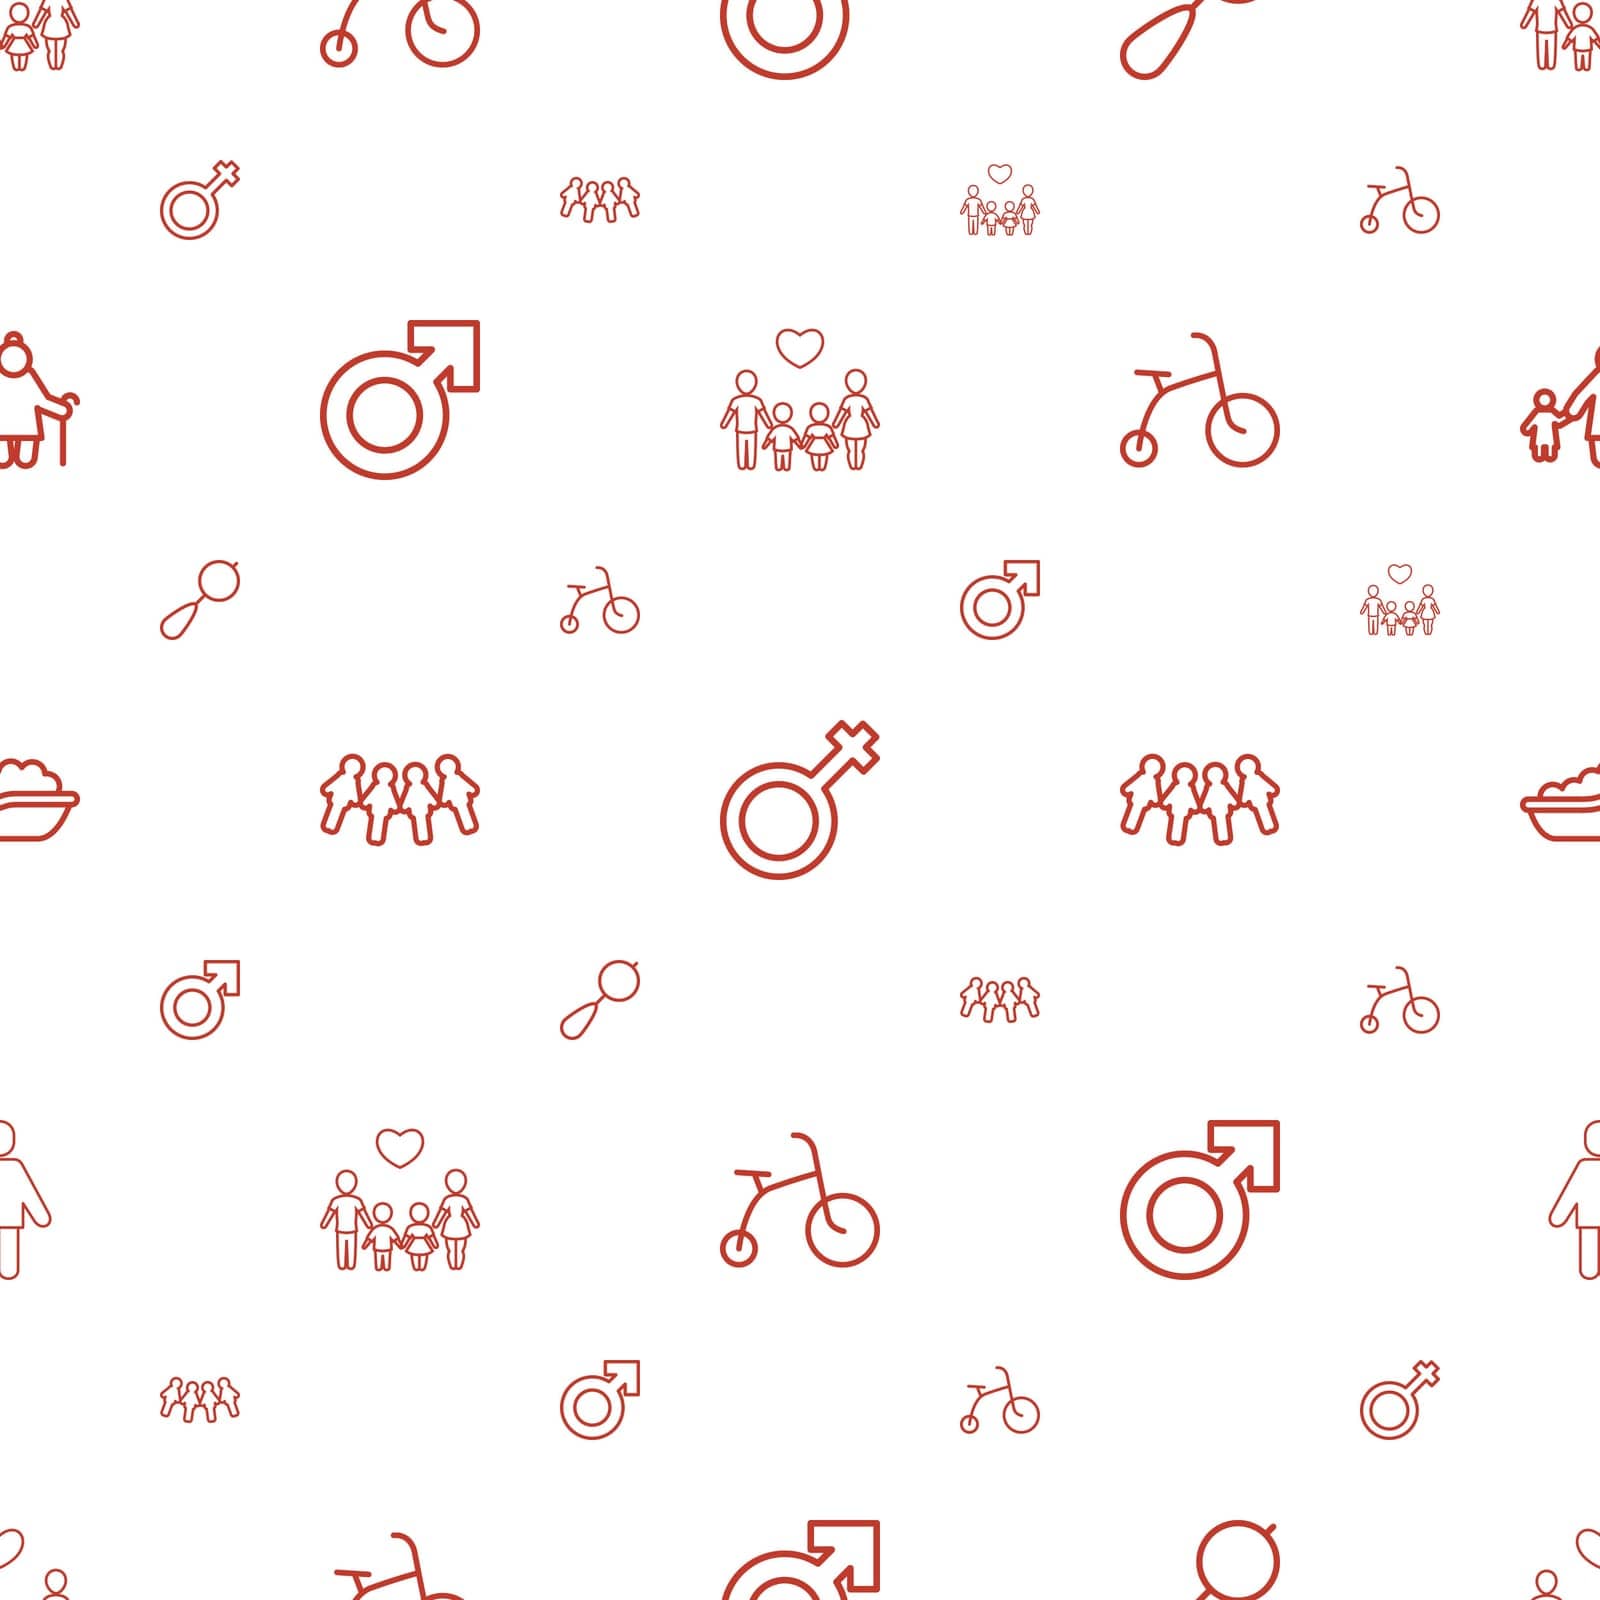 love,symbol,woman,gender,bicycle,happy,kid,concept,pattern,icon,sign,isolated,boy,cute,white,children,and,design,vector,man,female,human,bath,graphic,beanbag,element,shape,childhood,old,abstract,girl,people,background,baby,illustration,family,male,sexual,child by ogqcorp